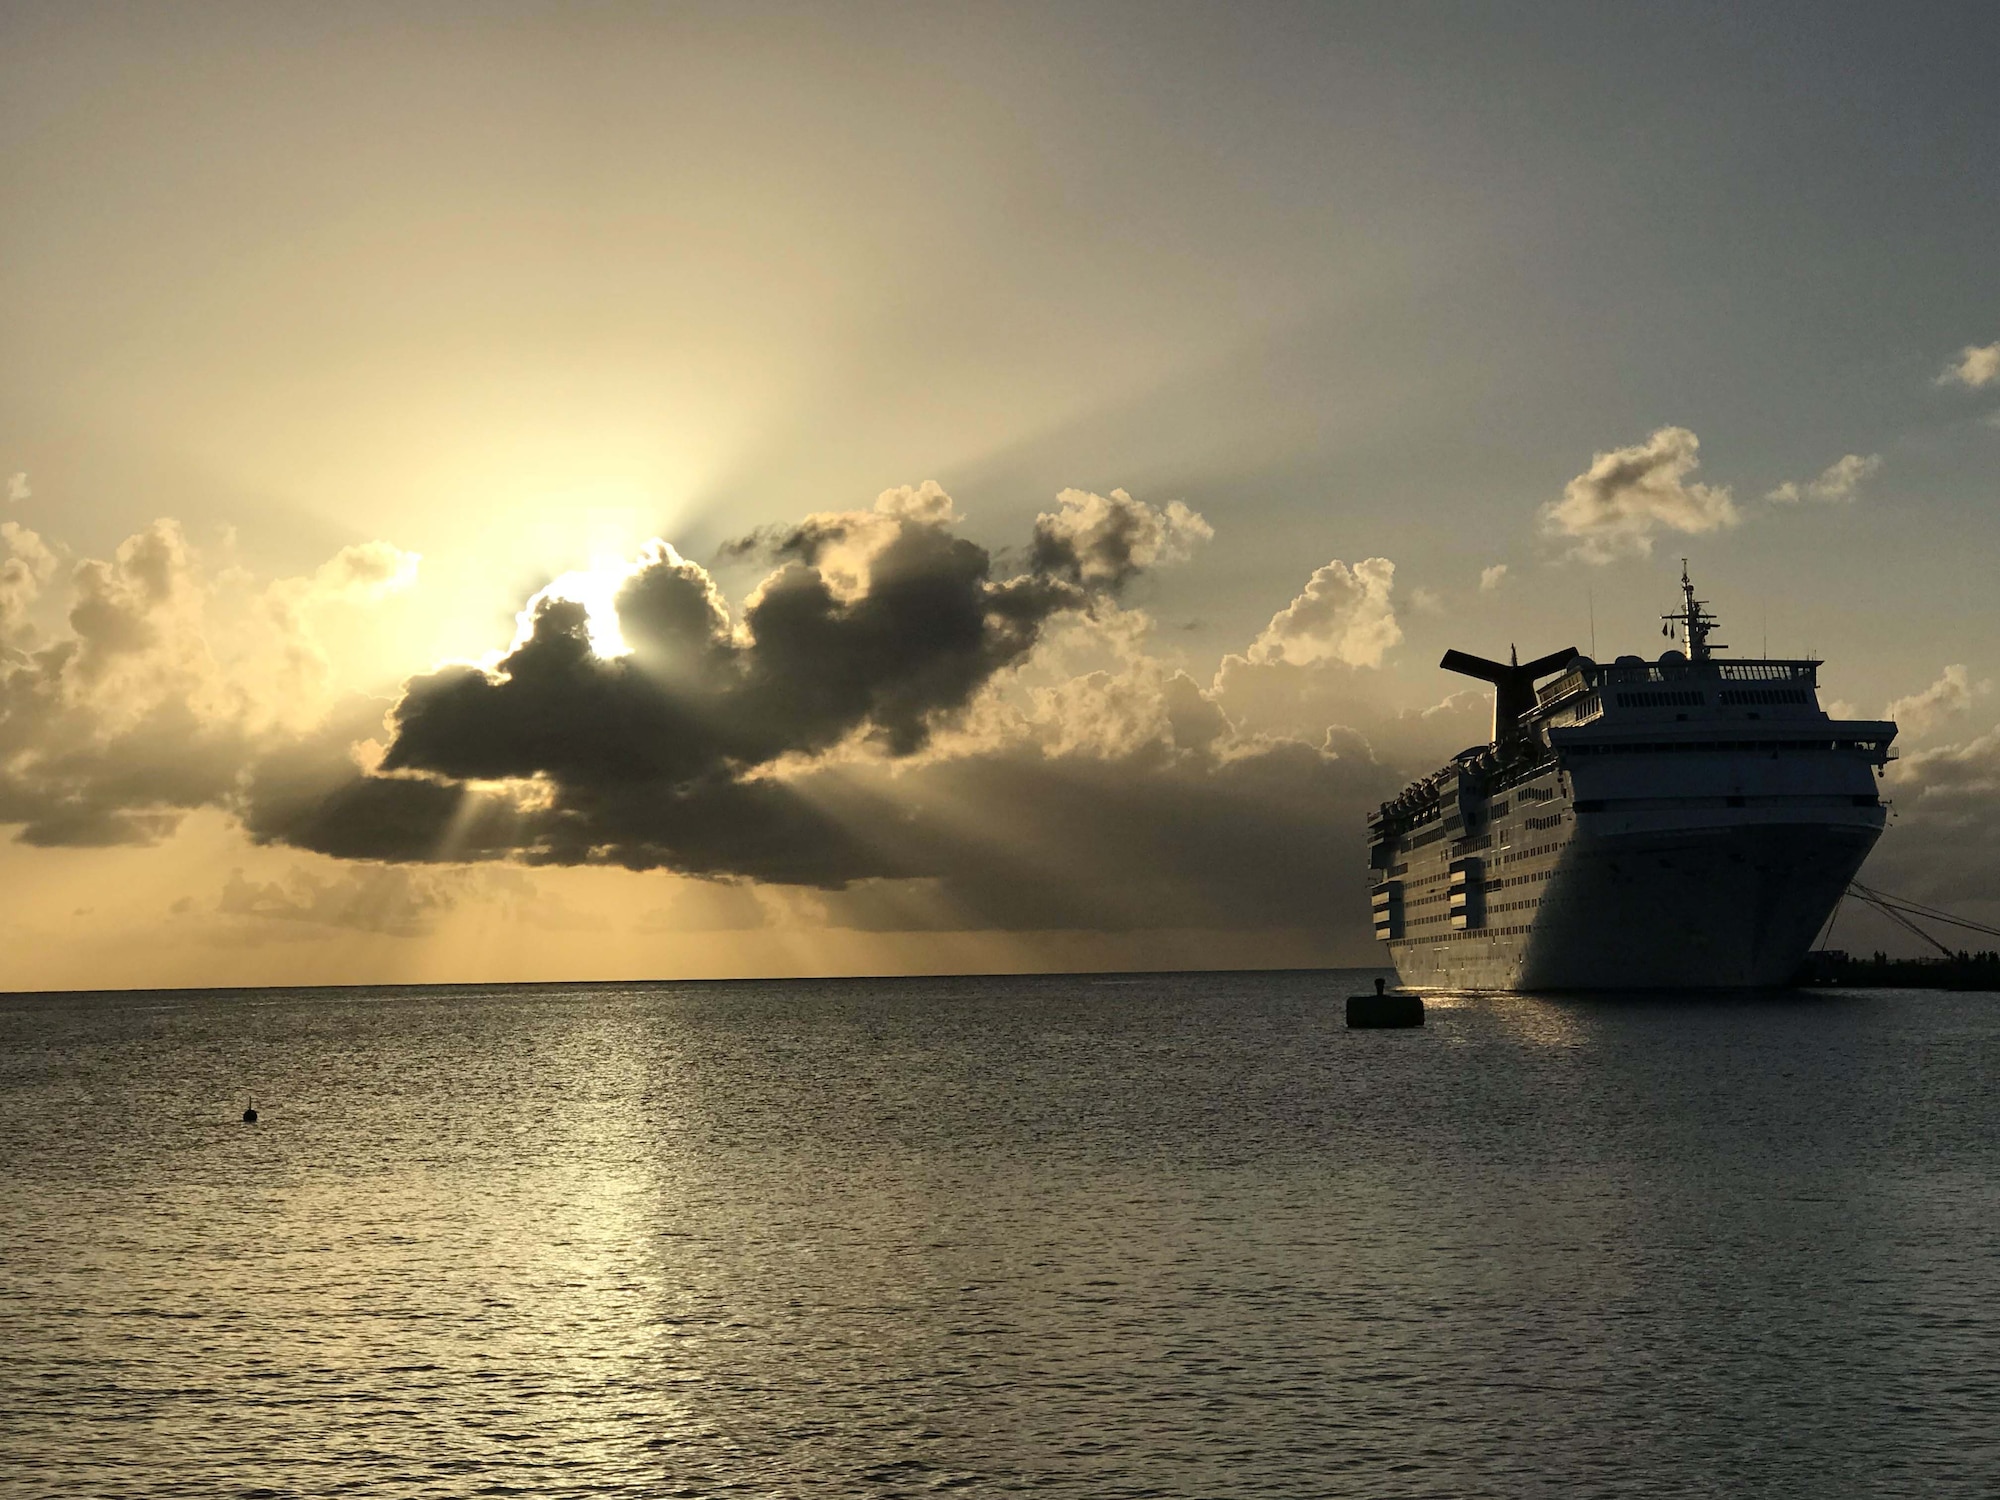 The sun slowly rises over the Lesser Antilles as Carnival Cruise Lines' ship, Fascination, can be seen moored at Frederiksted, St. Croix.  The docked ship was used to feed and house Federal Emergency Management Agency personnel who volunteered to help with disaster relief efforts after Hurricane Maria impacted the region in October 2017.  (U.S. Air Force photo by M. Claudette Wells)